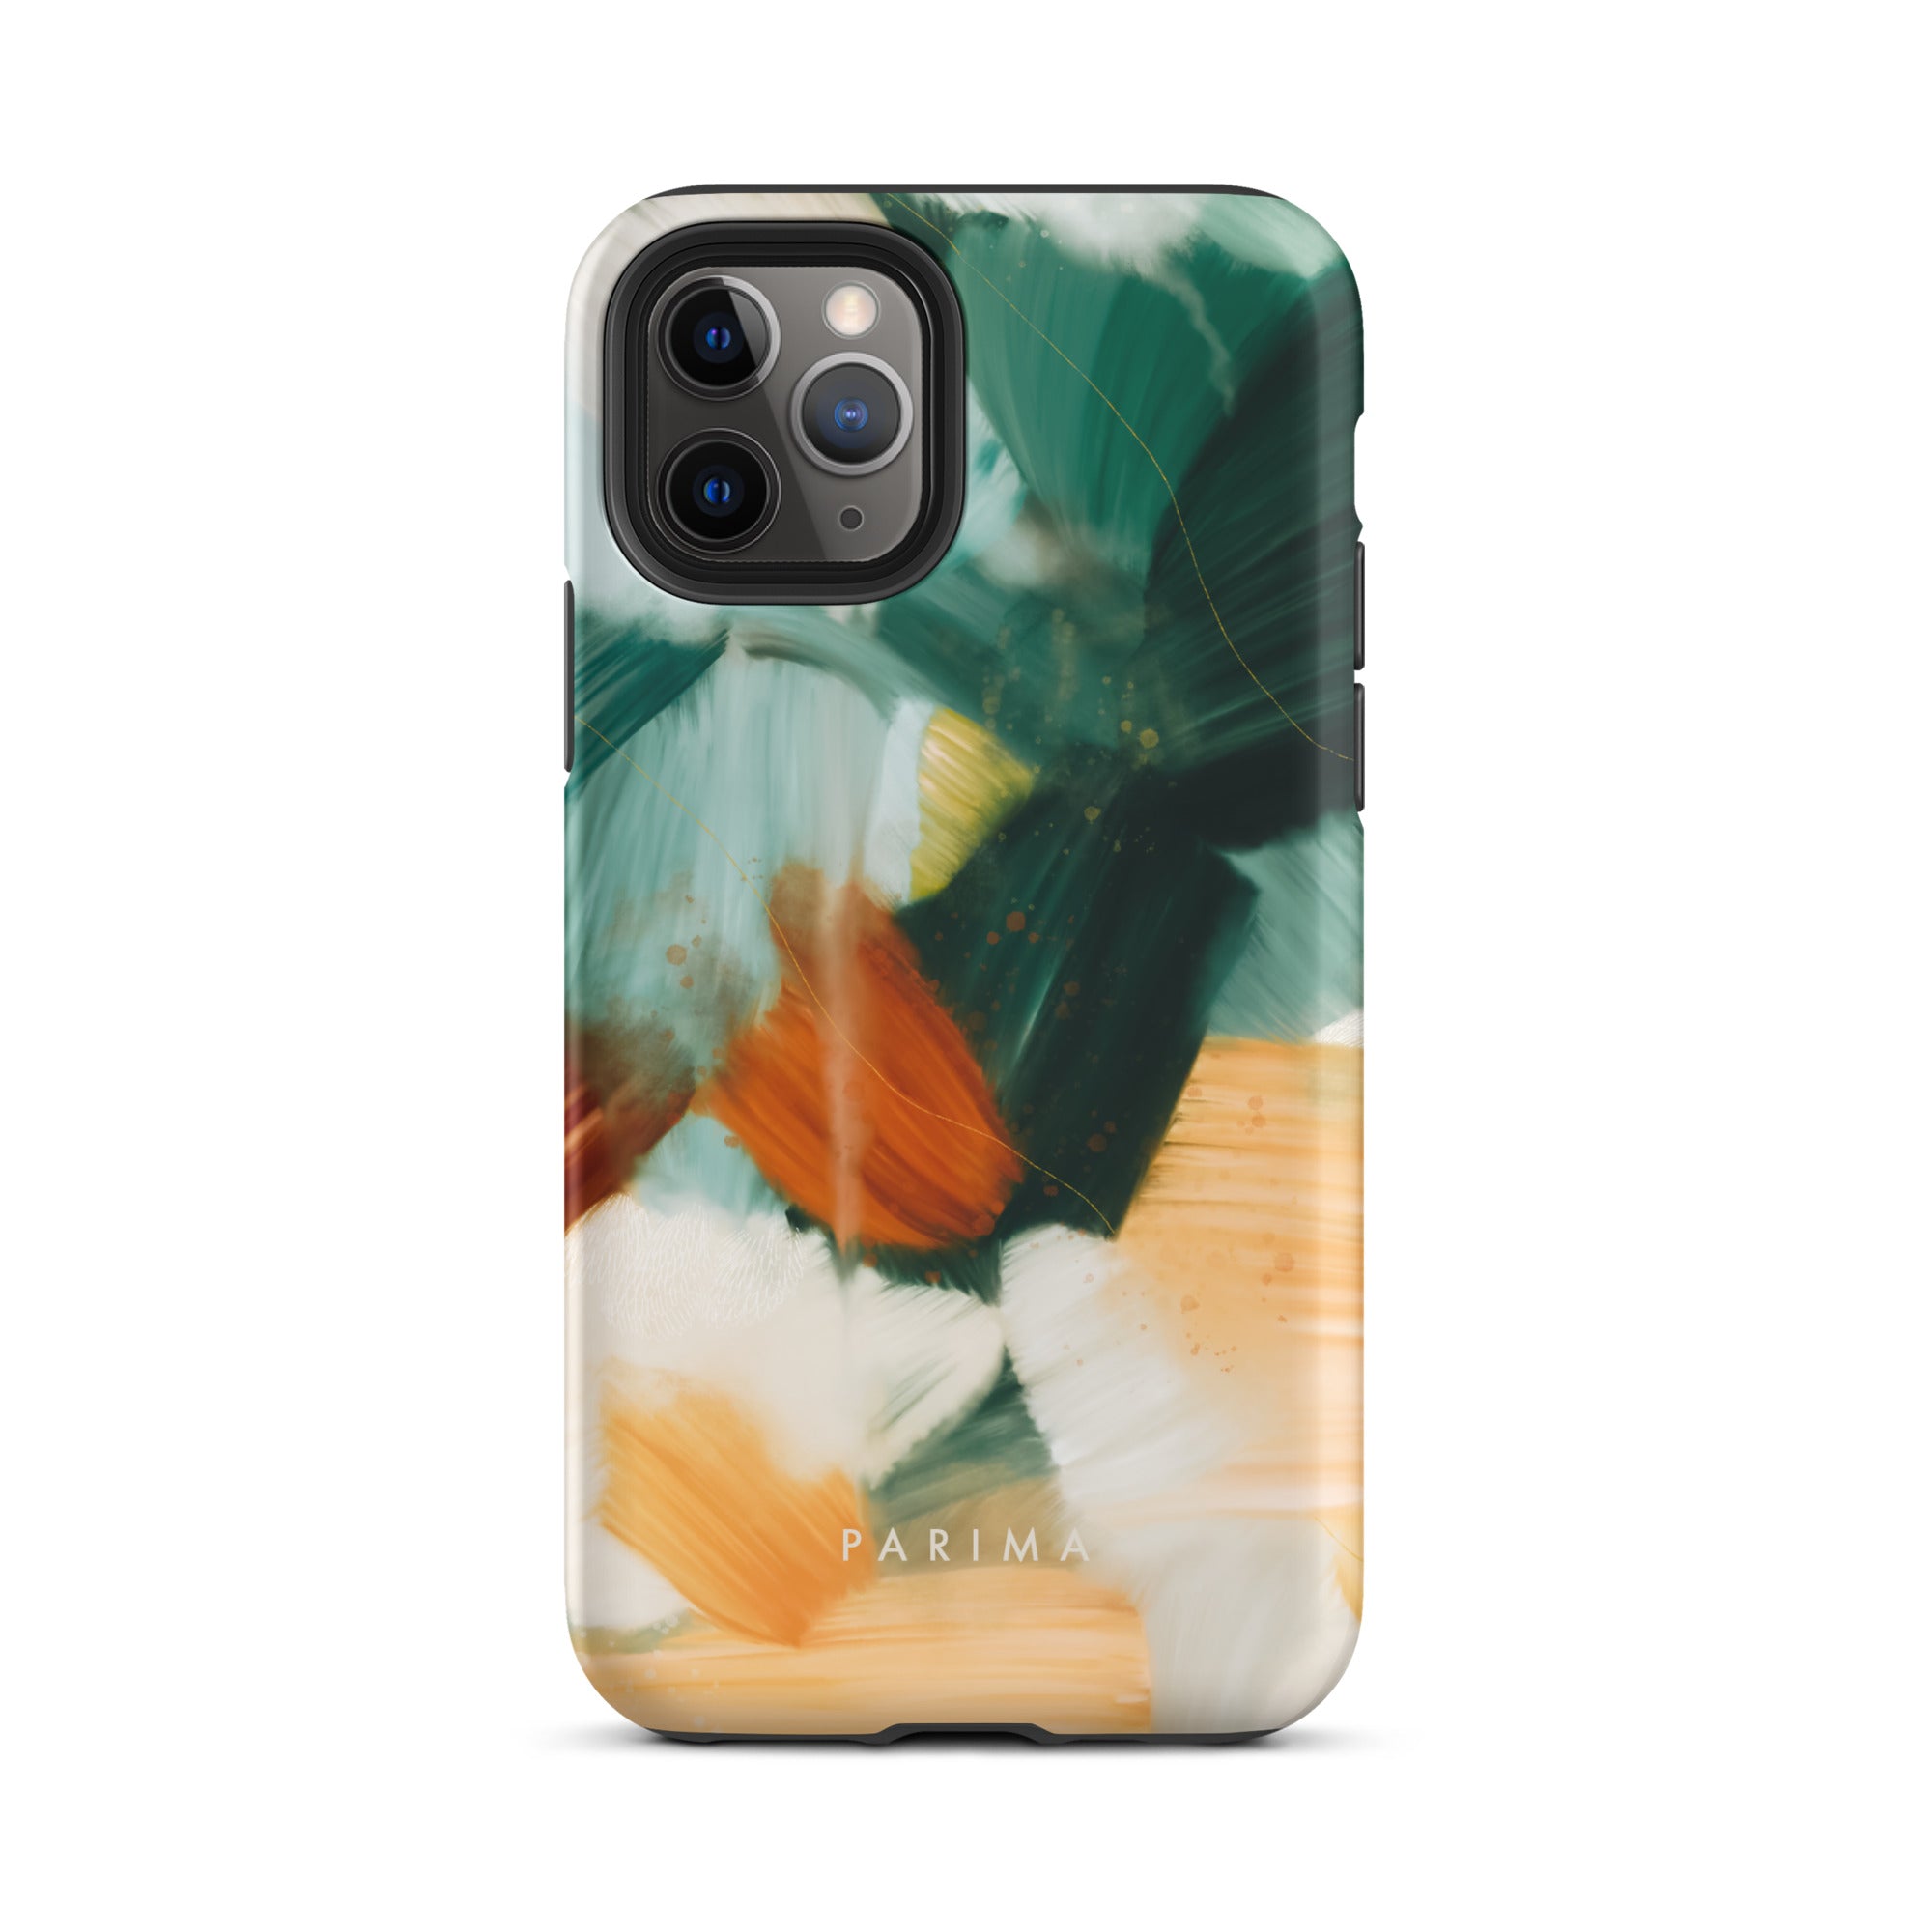 Meridian, green and orange abstract art on iPhone 11 Pro tough case by Parima Studio